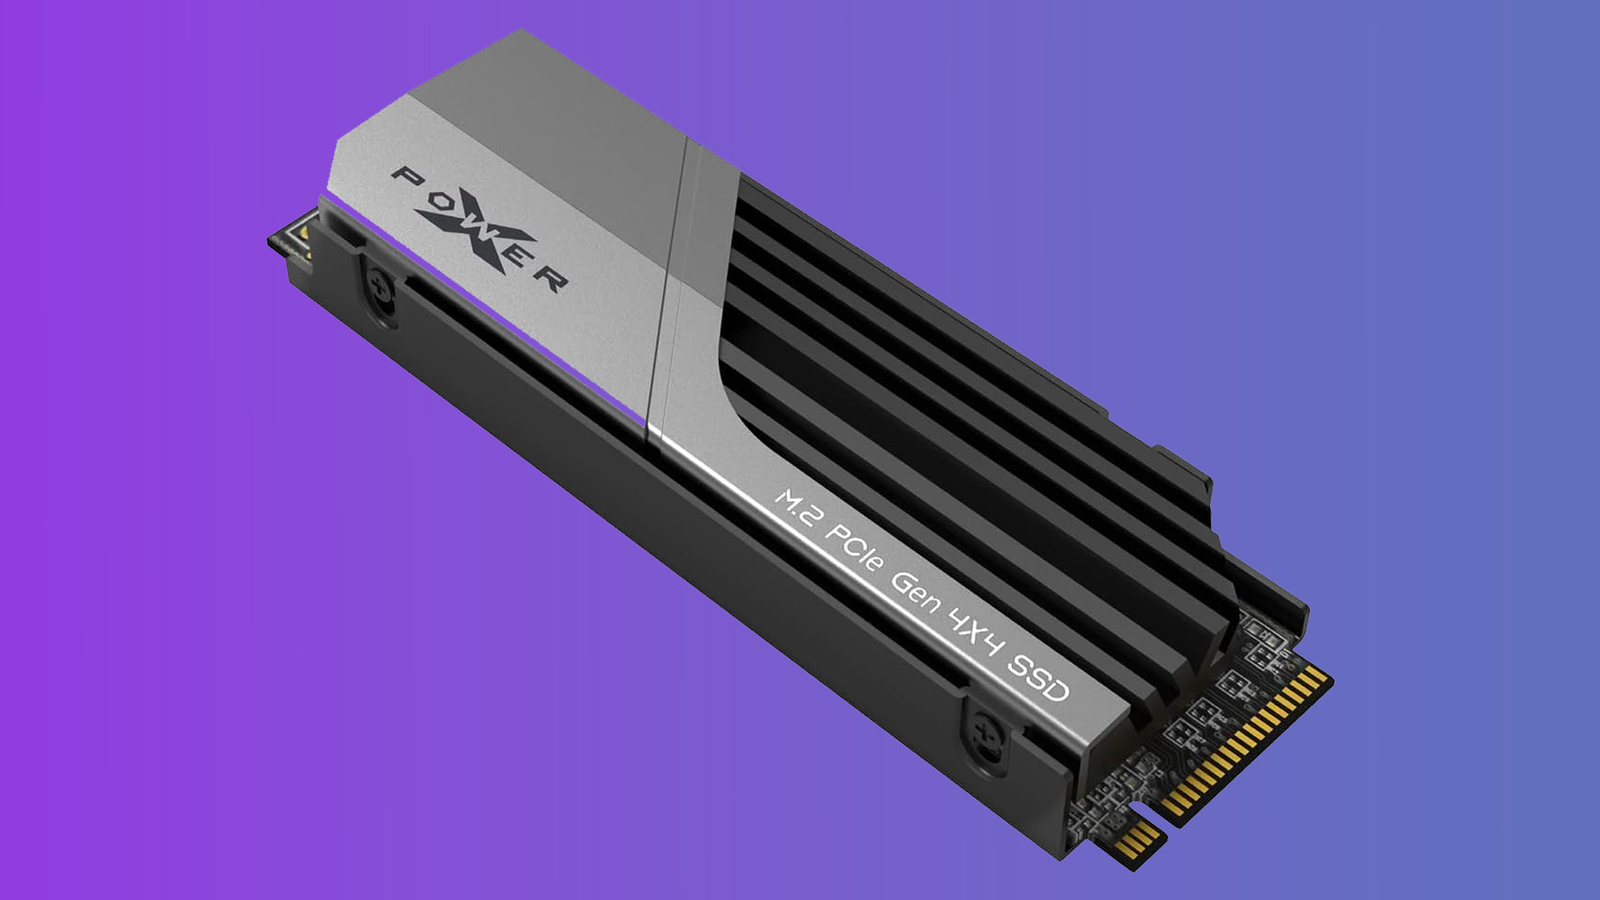 This 2TB Silicon Power NVMe SSD is just £70 from